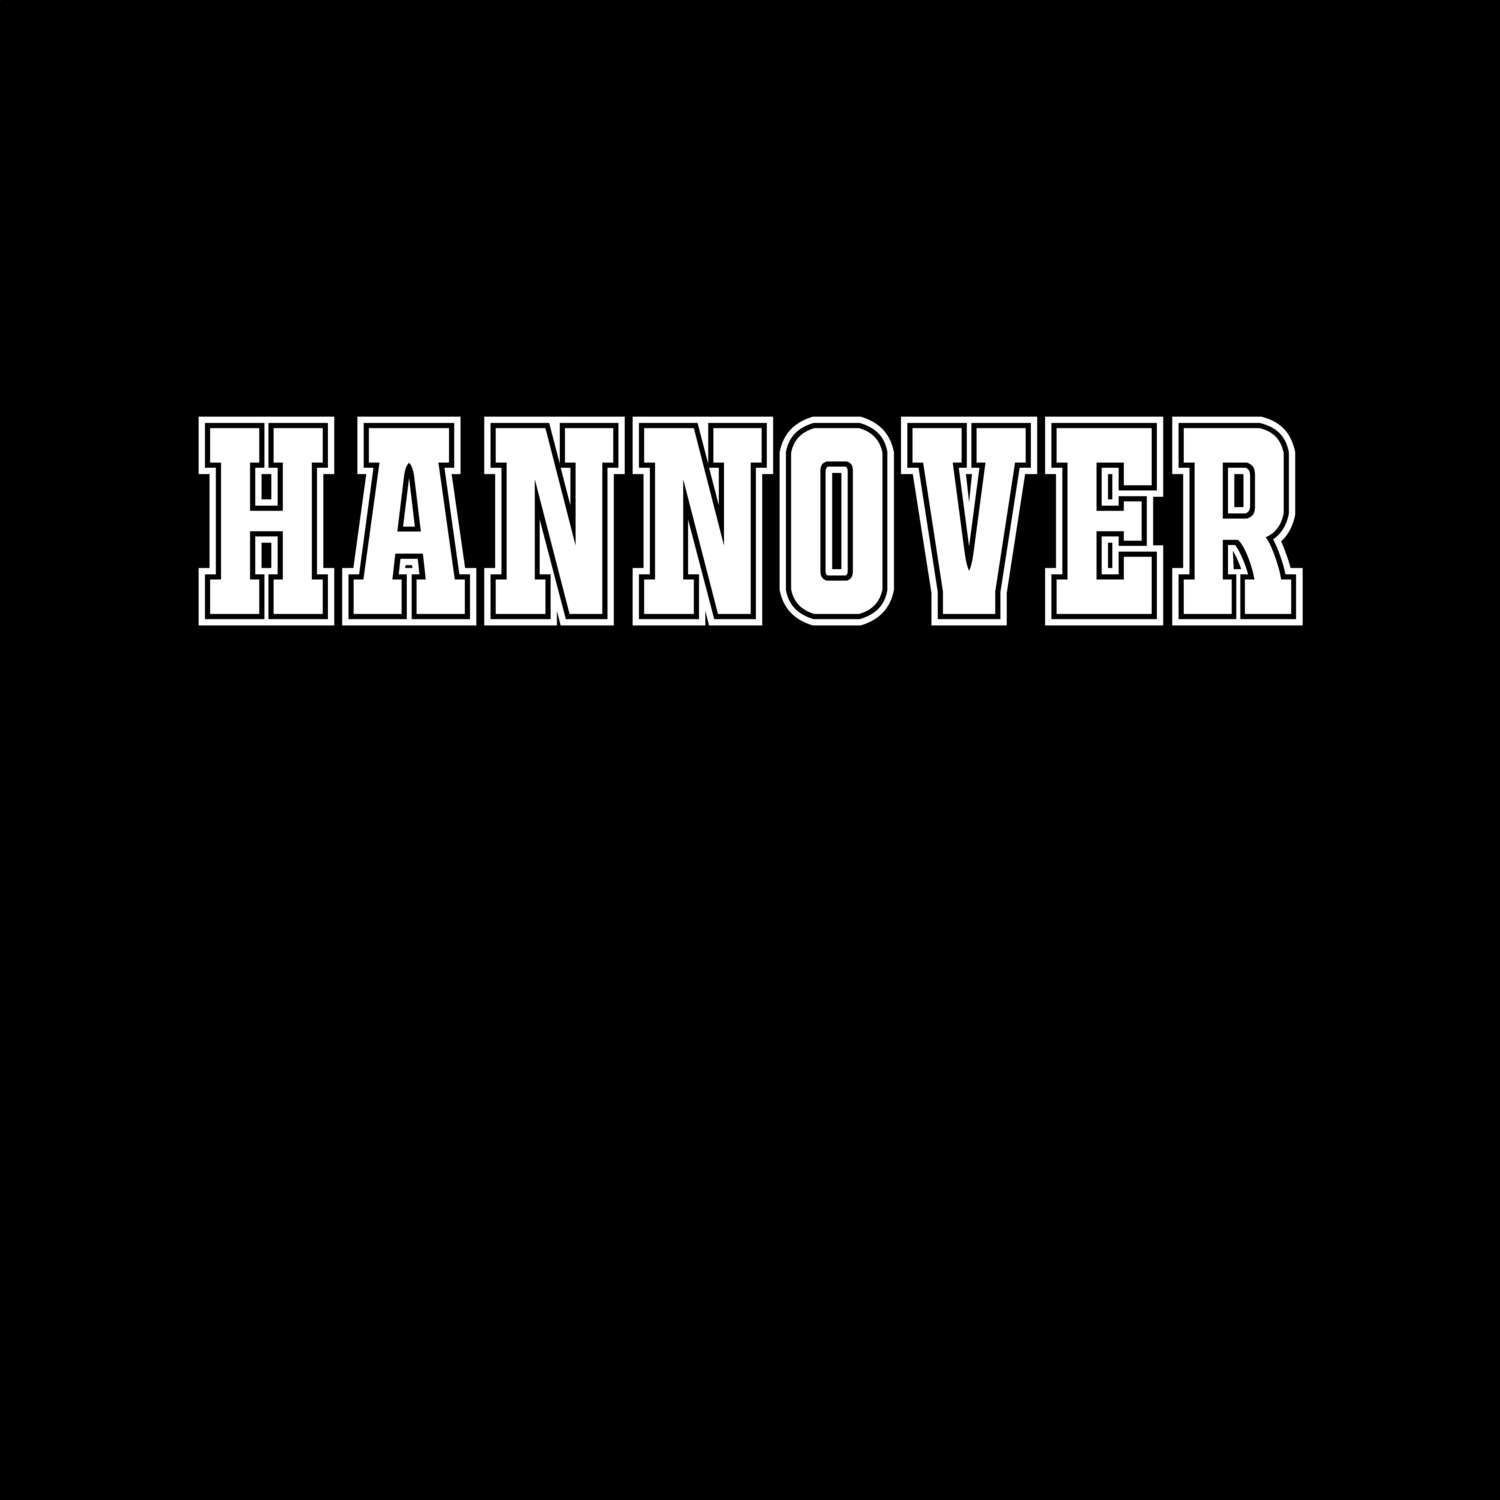 Hannover T-Shirt »Classic«